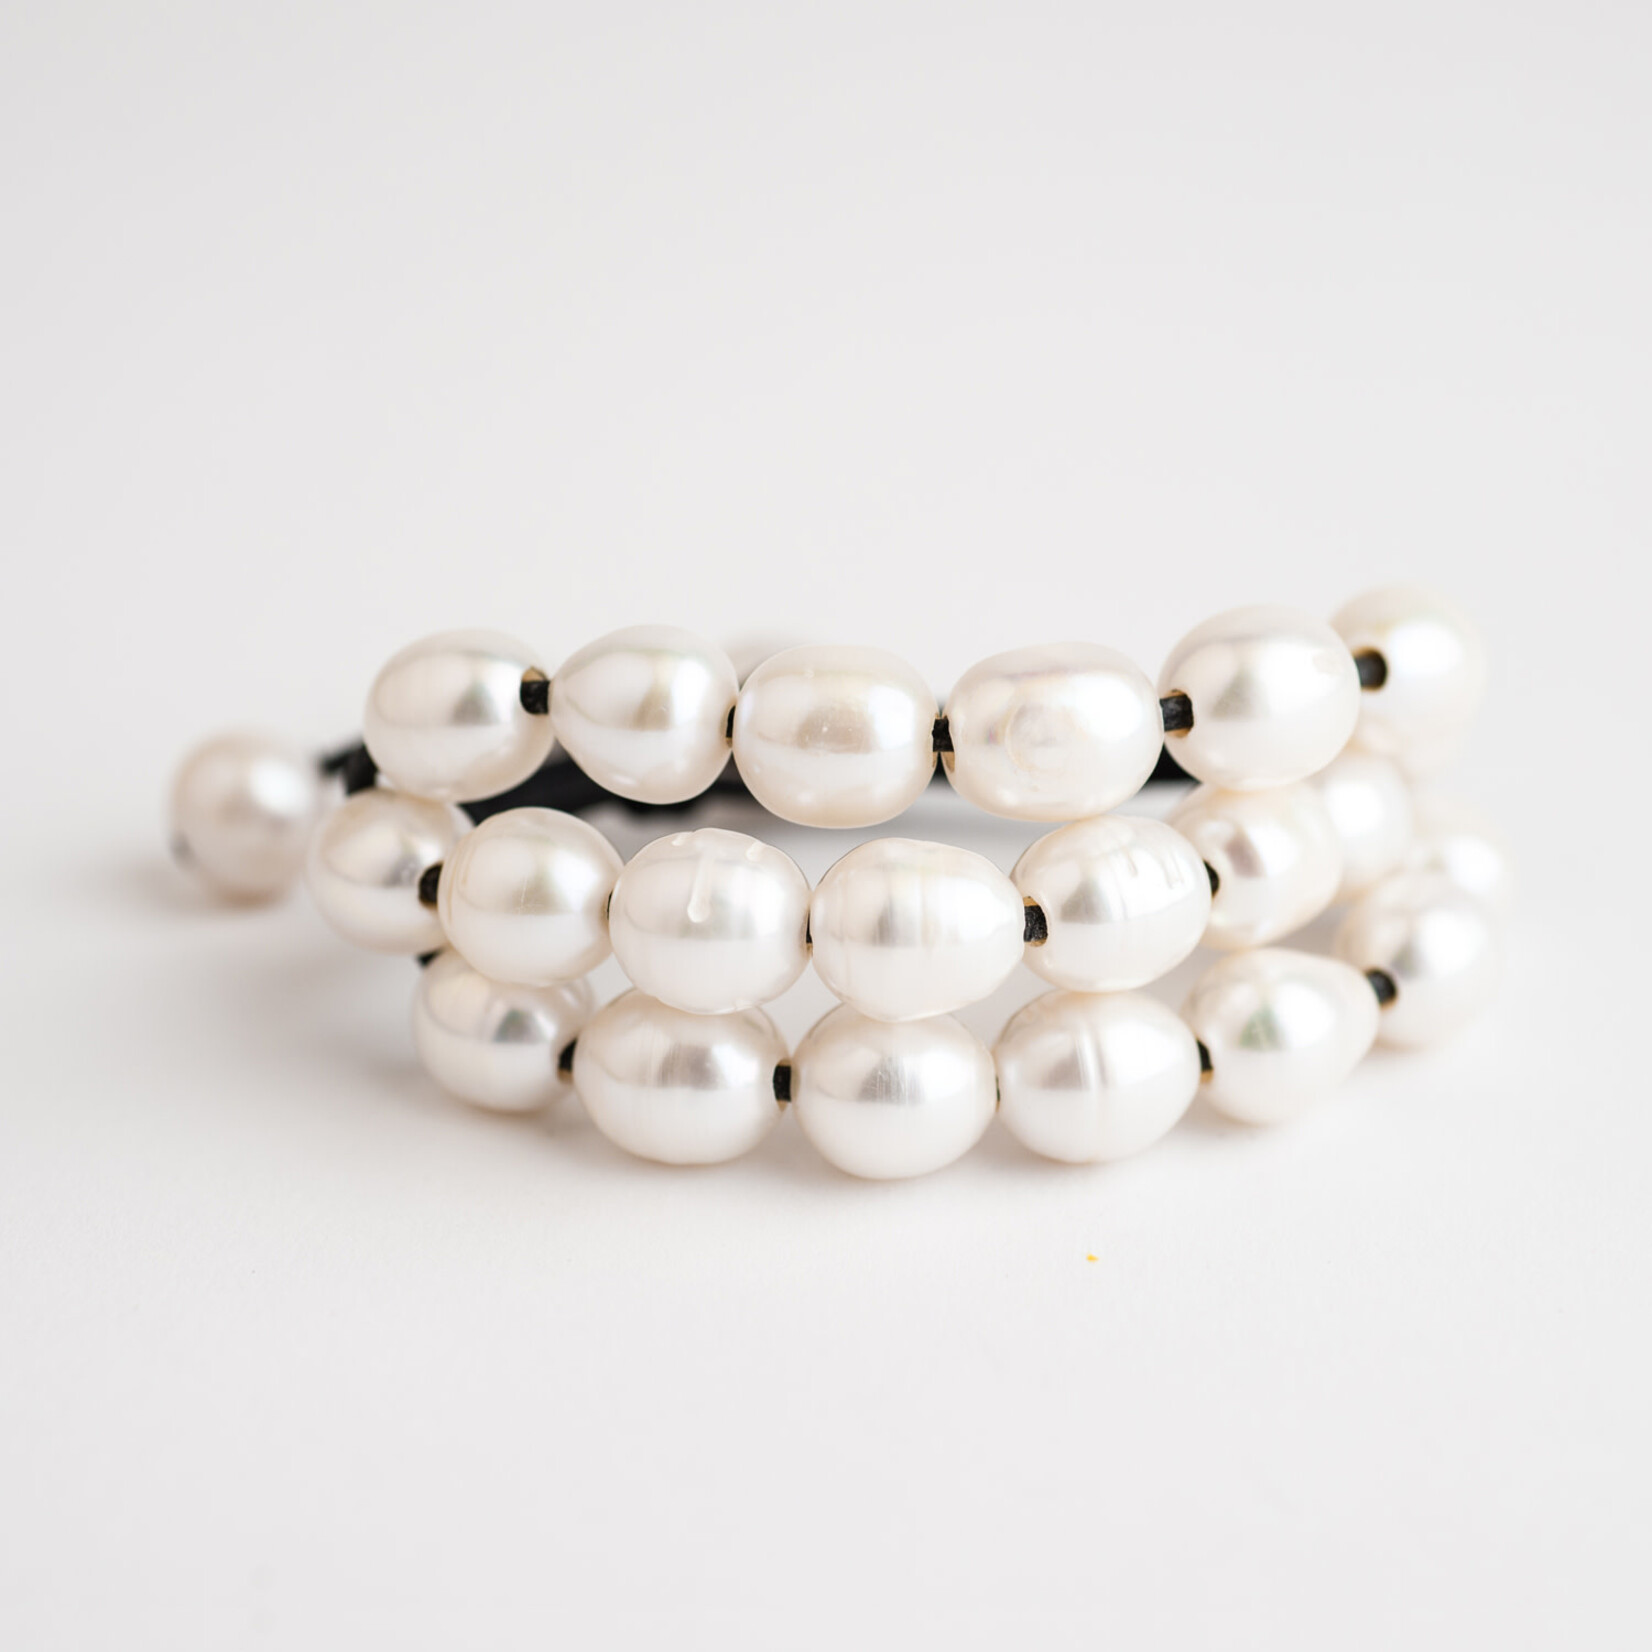 Mina Danielle 3 Strand White Pearls with 3 hanging Pearls and Button Closure